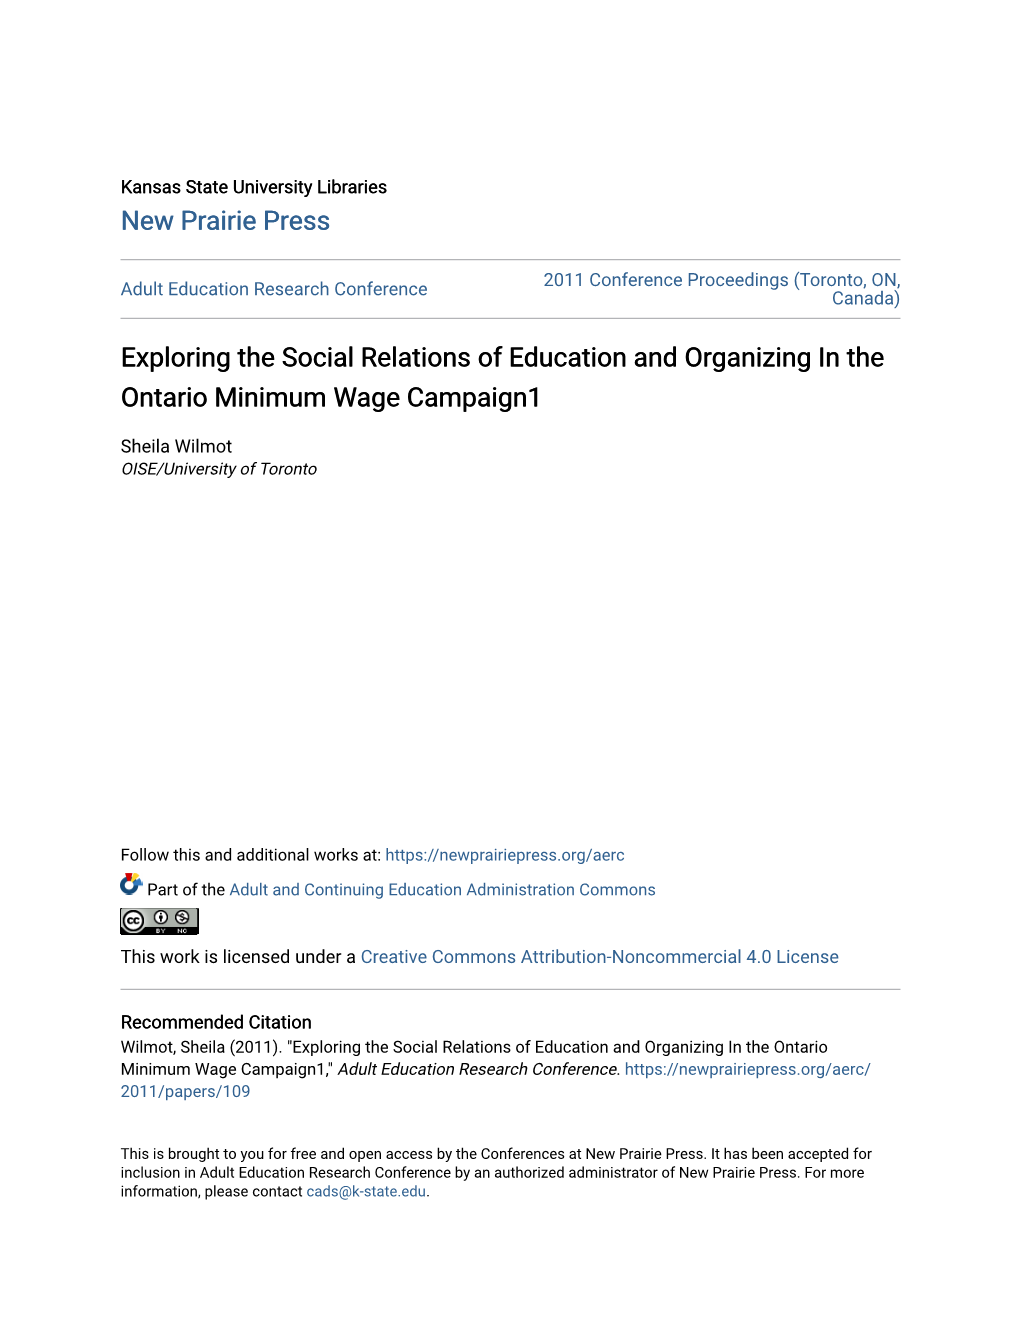 Exploring the Social Relations of Education and Organizing in the Ontario Minimum Wage Campaign1